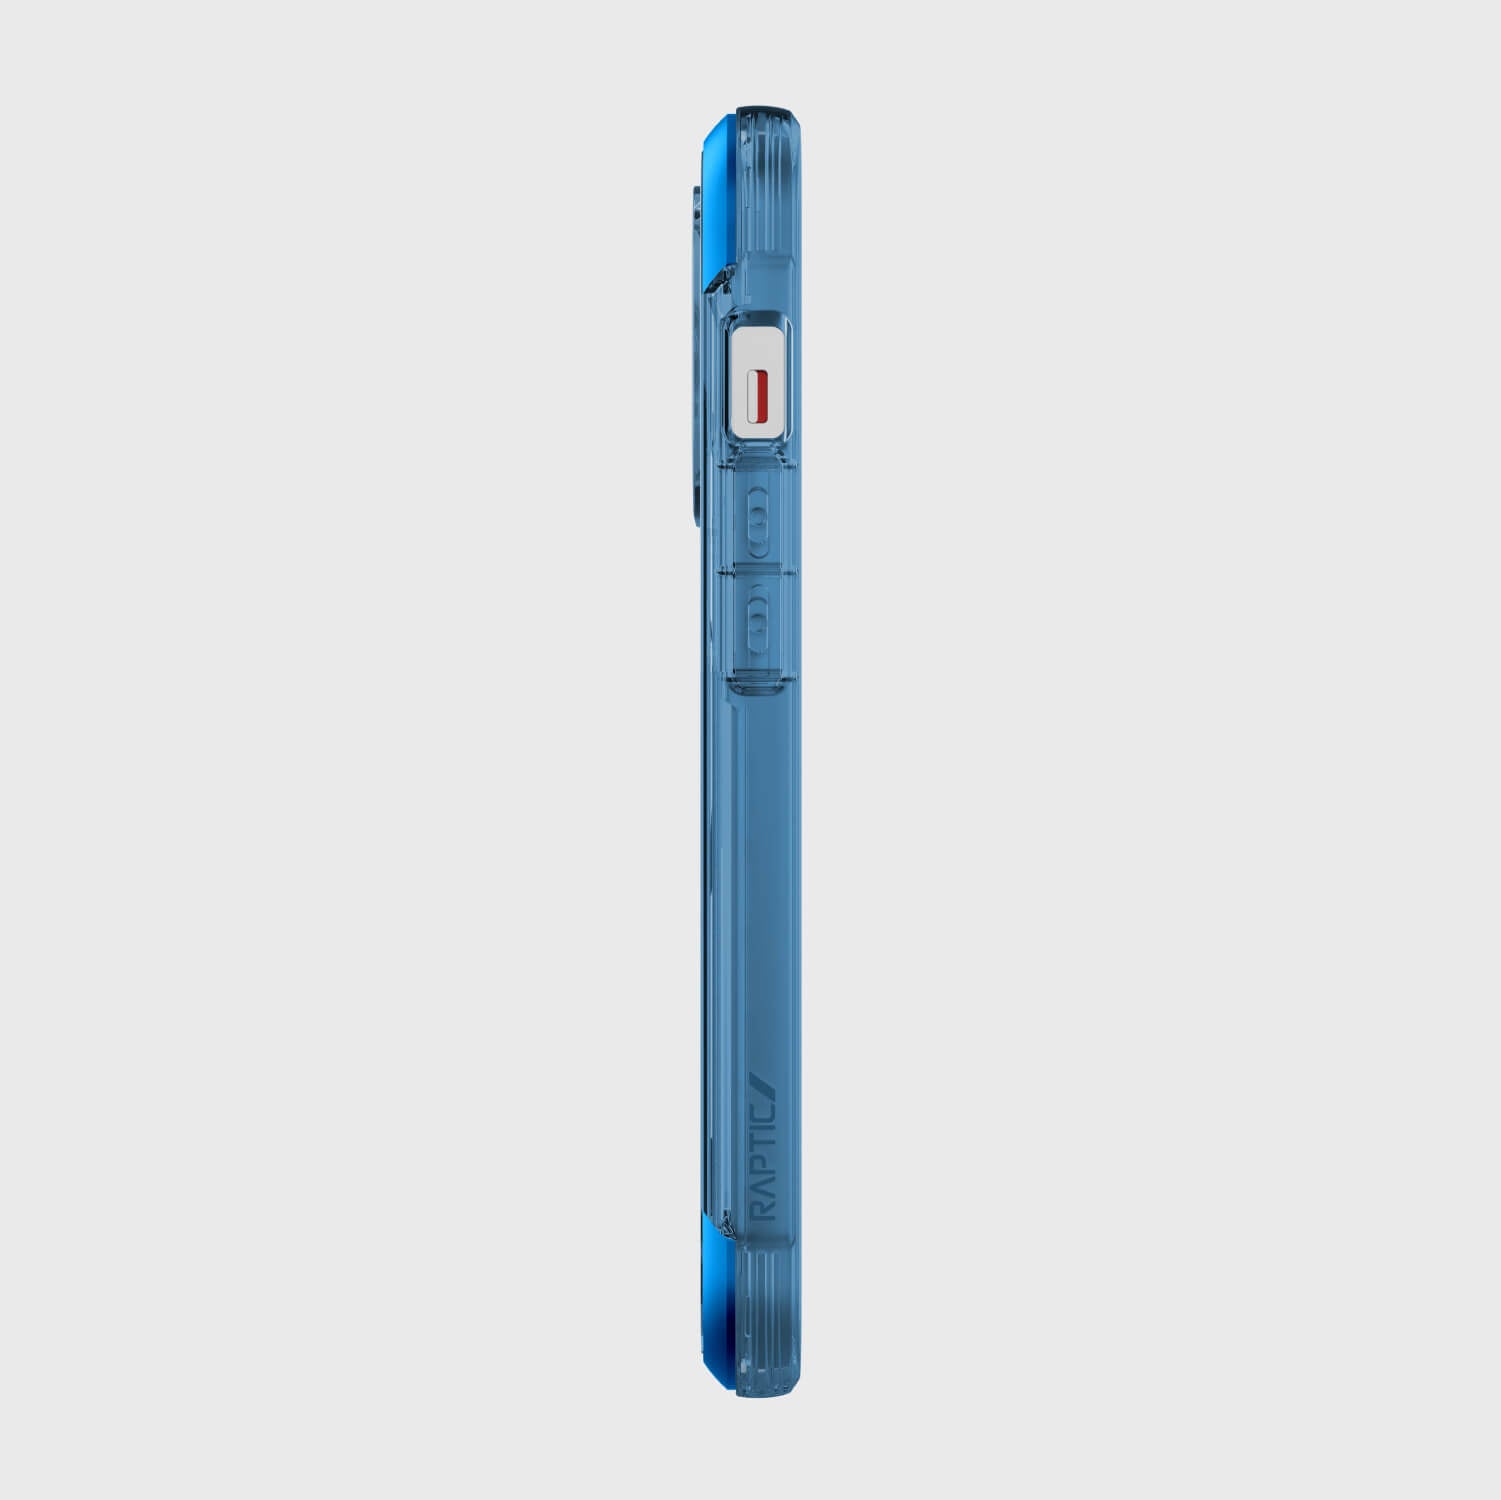 A Raptic iPhone 13 Pro Max Case - AIR with 13-foot drop protection.